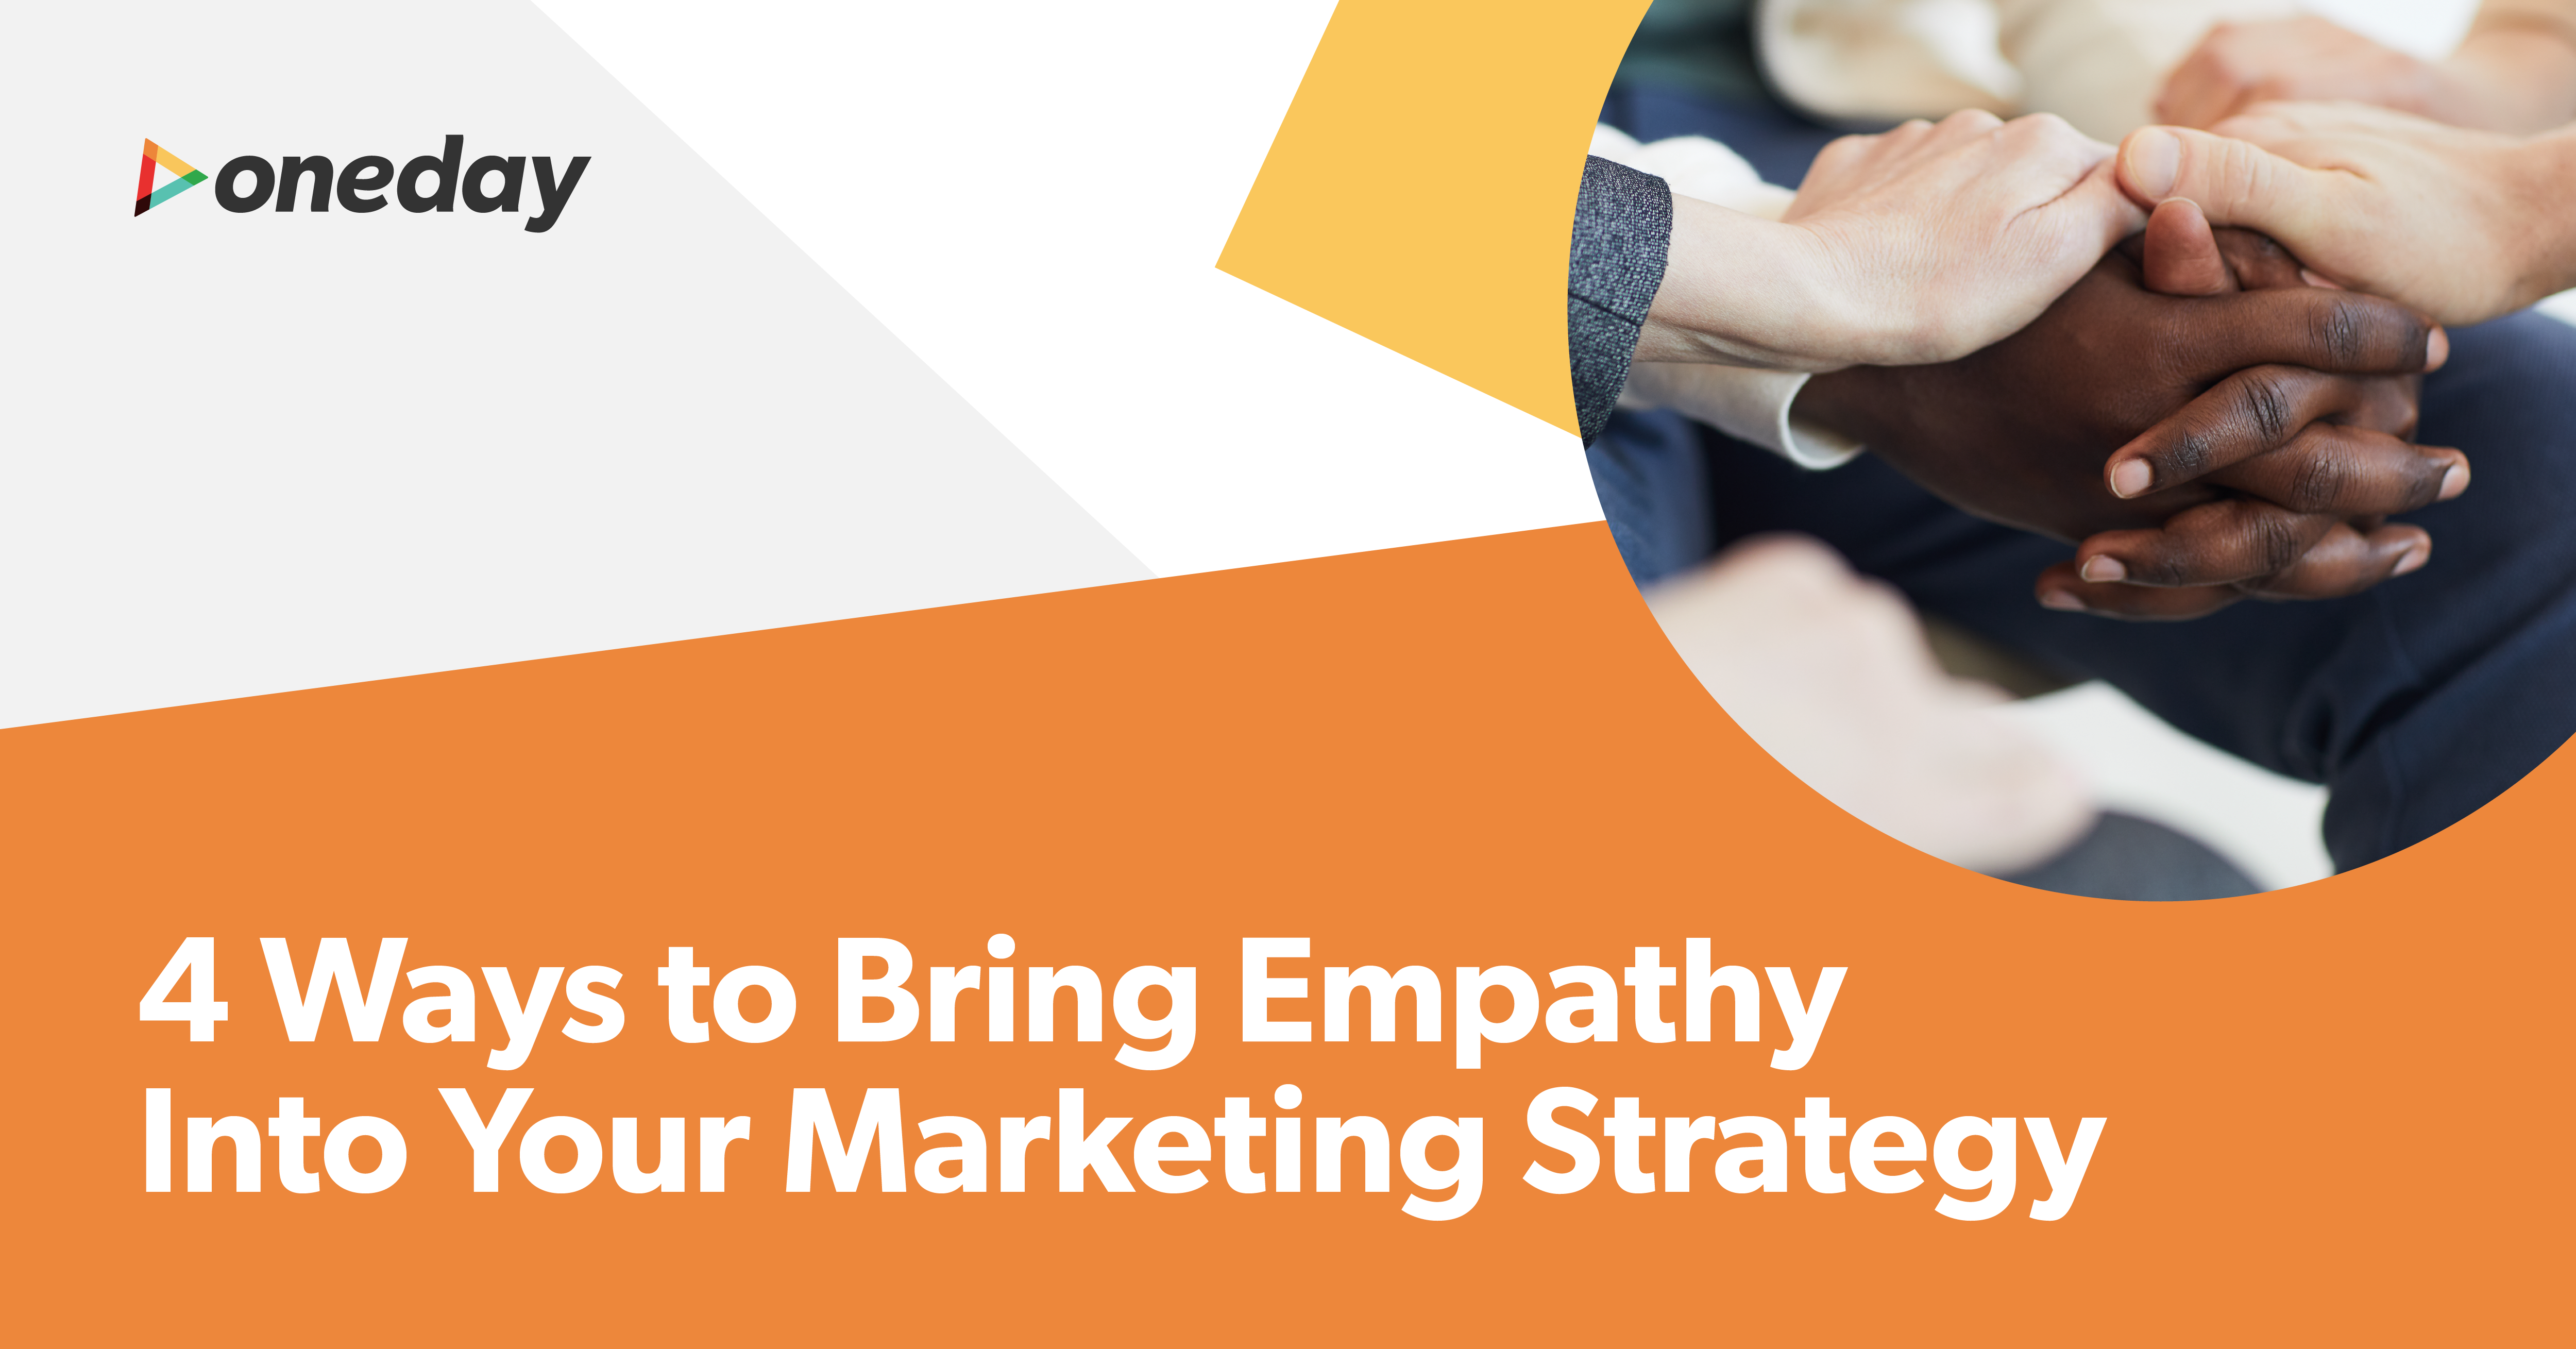 A look at the power of empathy in your marketing, why it’s the secret ingredient to truly powerful messaging, and how video is the ideal format to convey it.